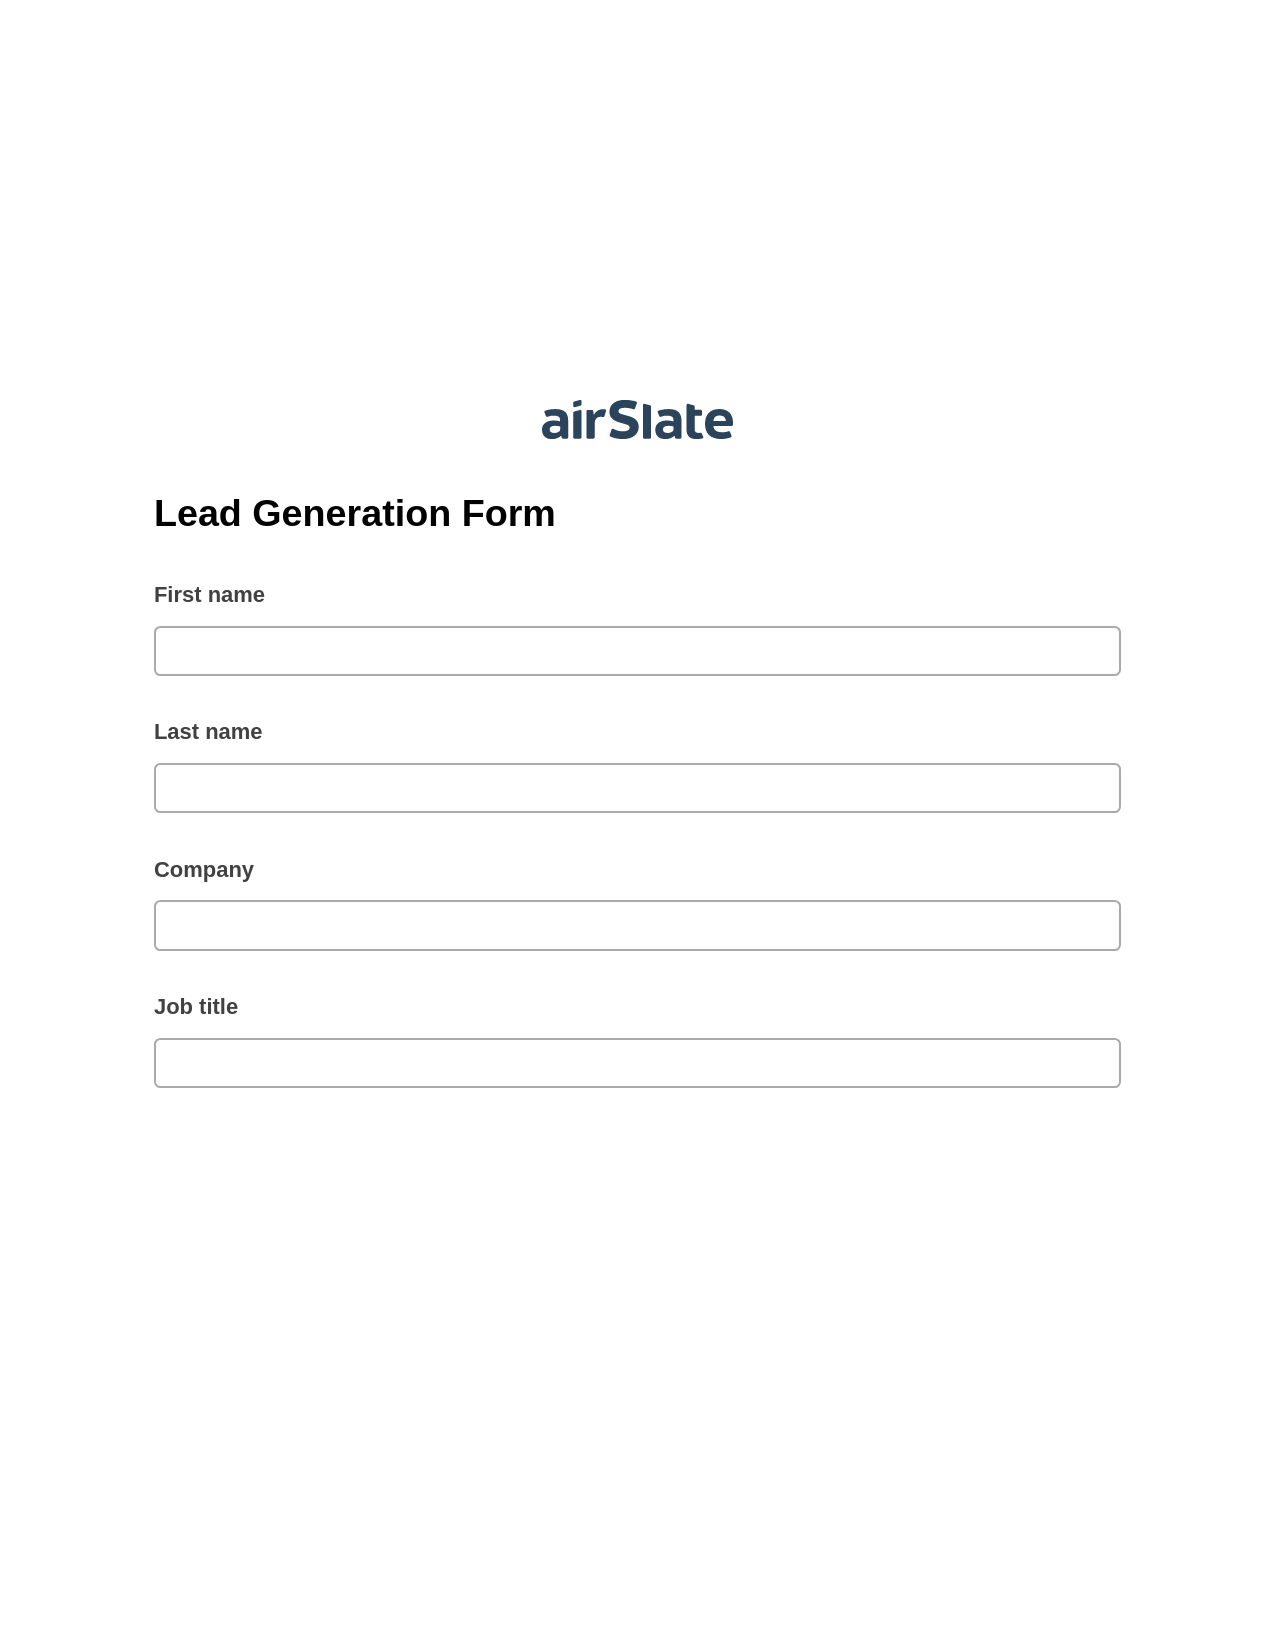 Multirole Lead Generation Form Pre-fill Document Bot, Remove Slate Bot, Export to NetSuite Bot